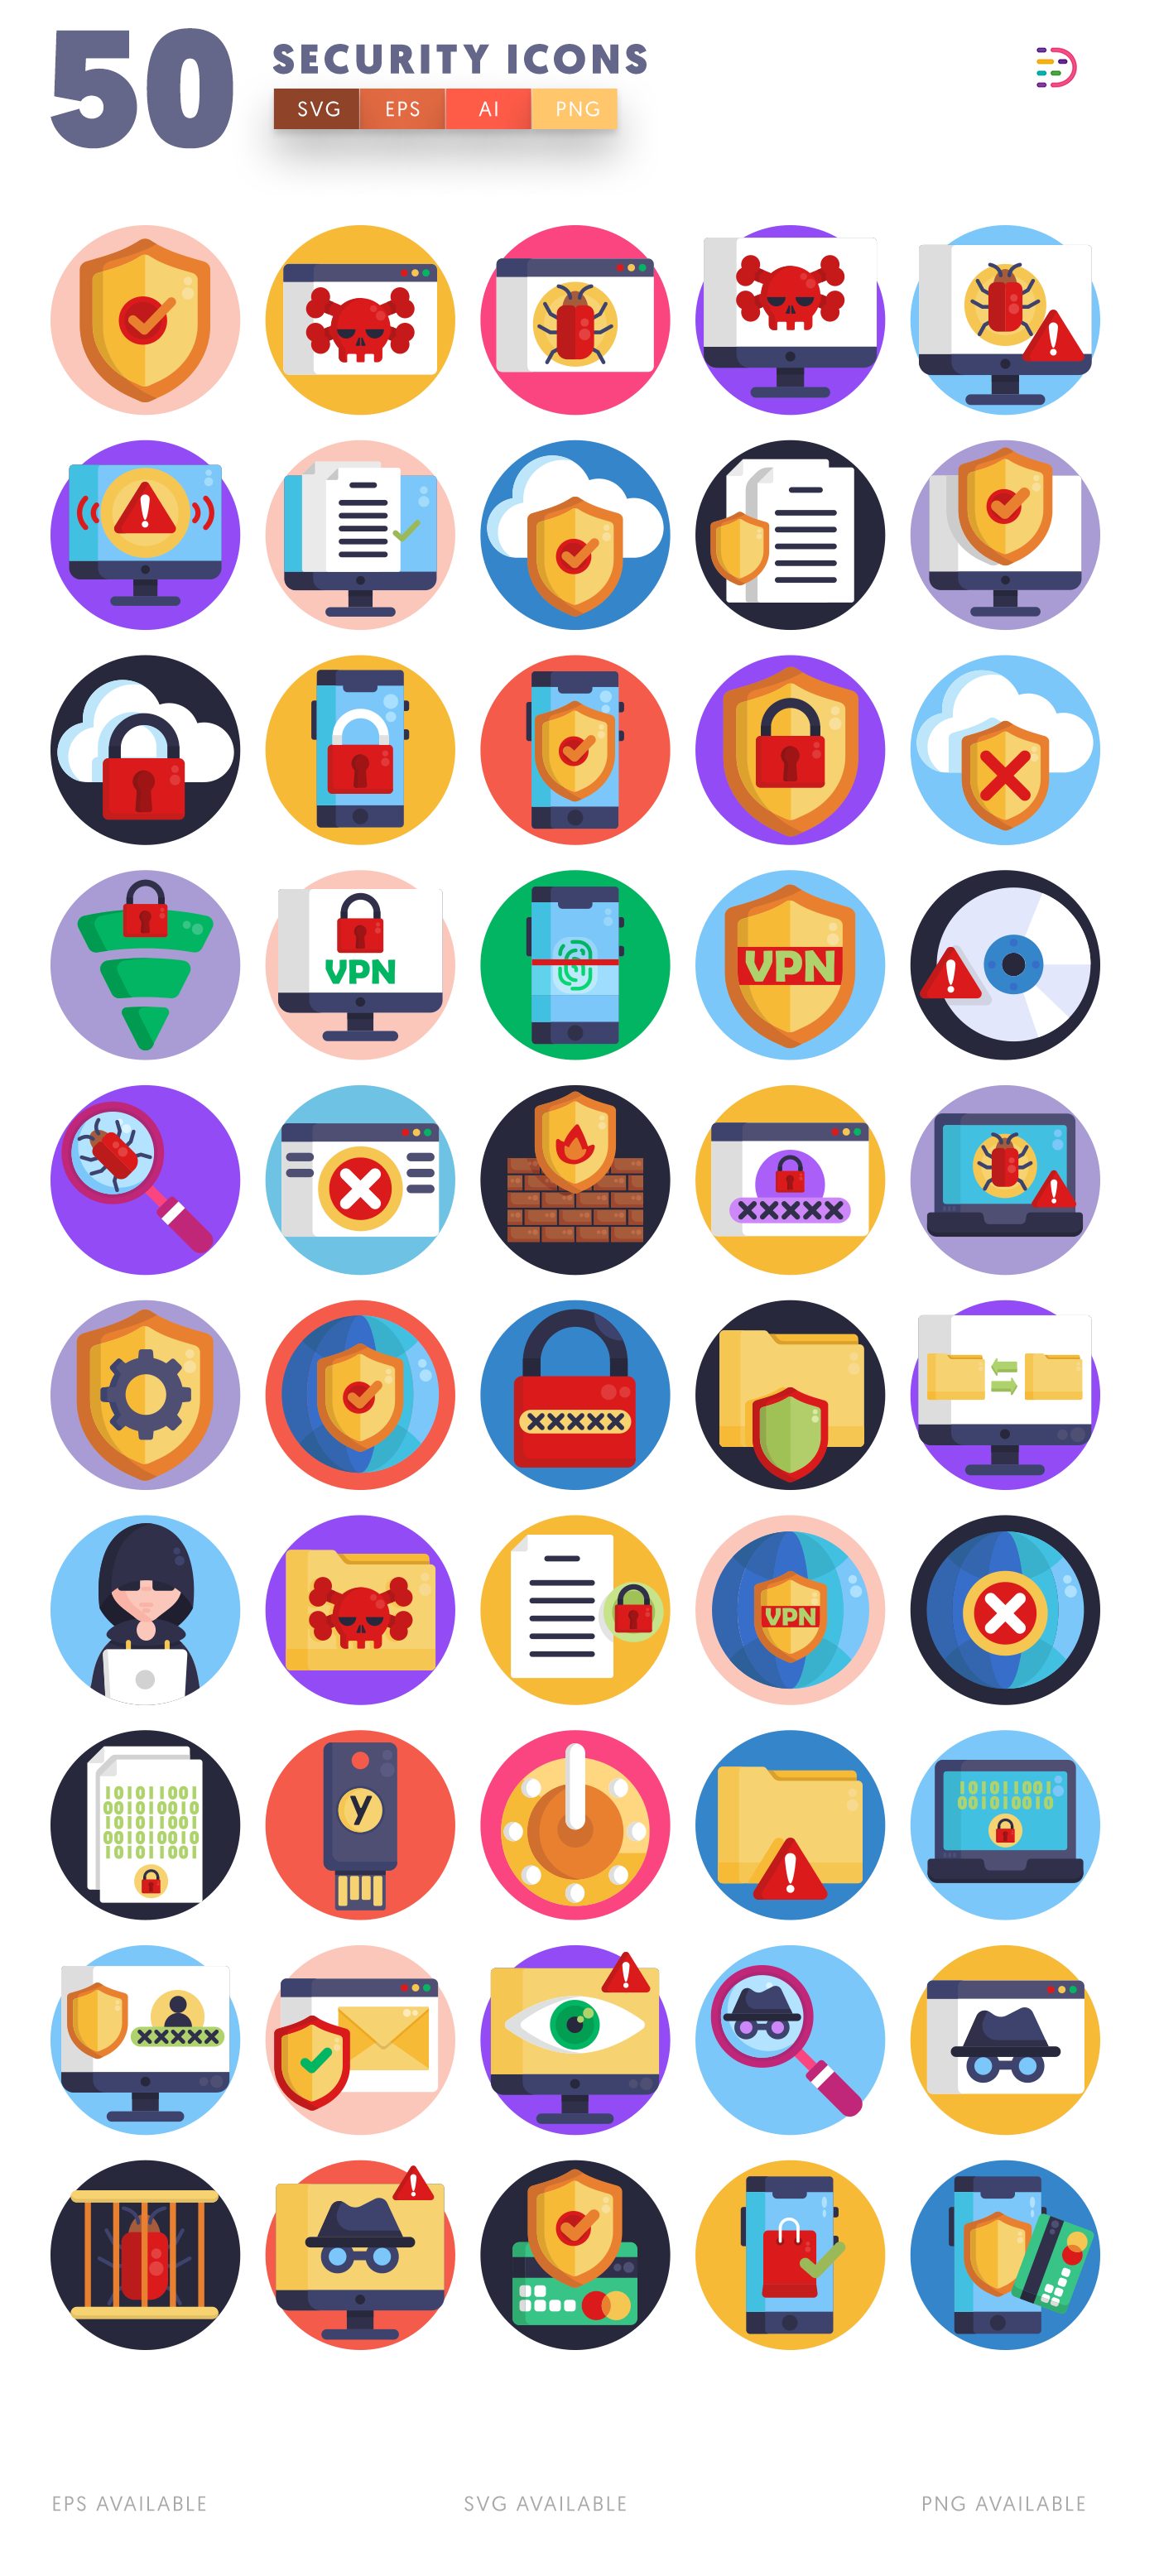 Security icon pack